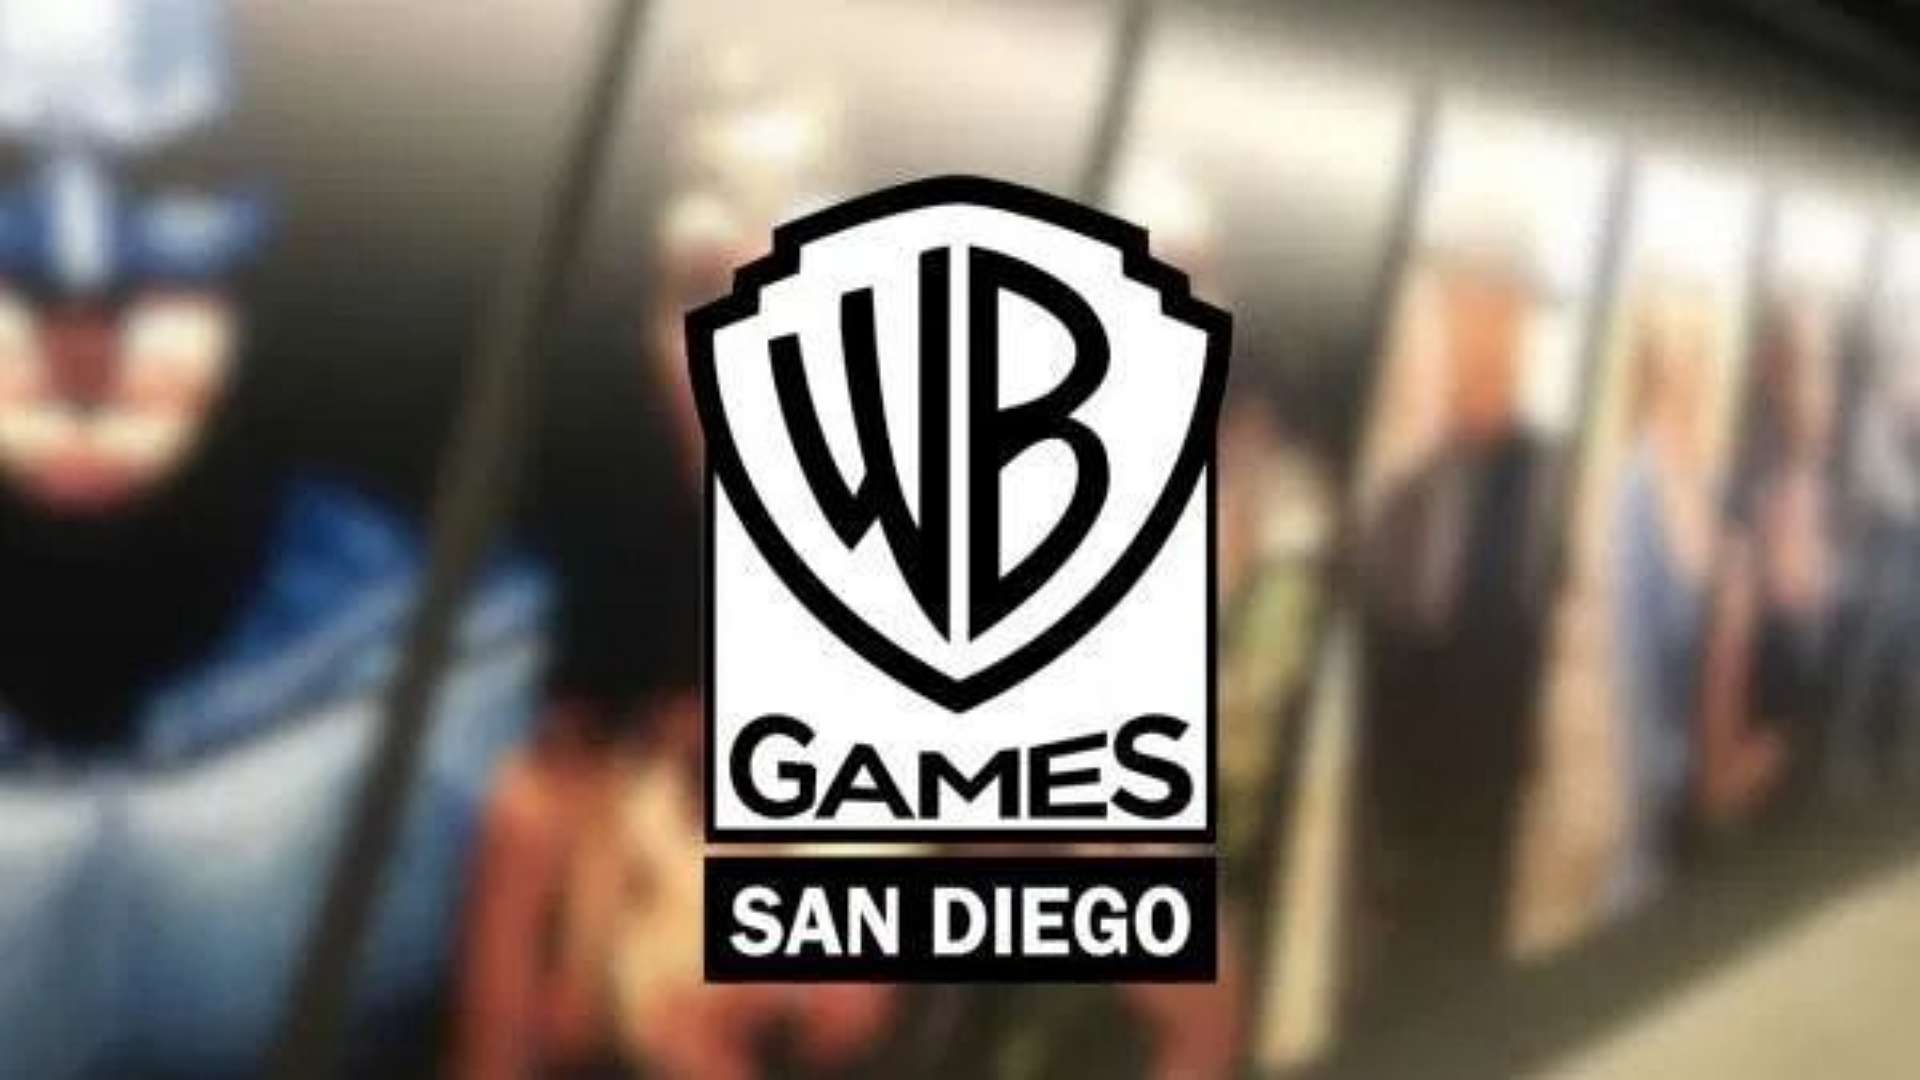 Warner Bros. Games San Diego Hiring For 'New AAA F2P Cross-Platform'  Project, Will Use Unreal Engine 4 - PlayStation Universe